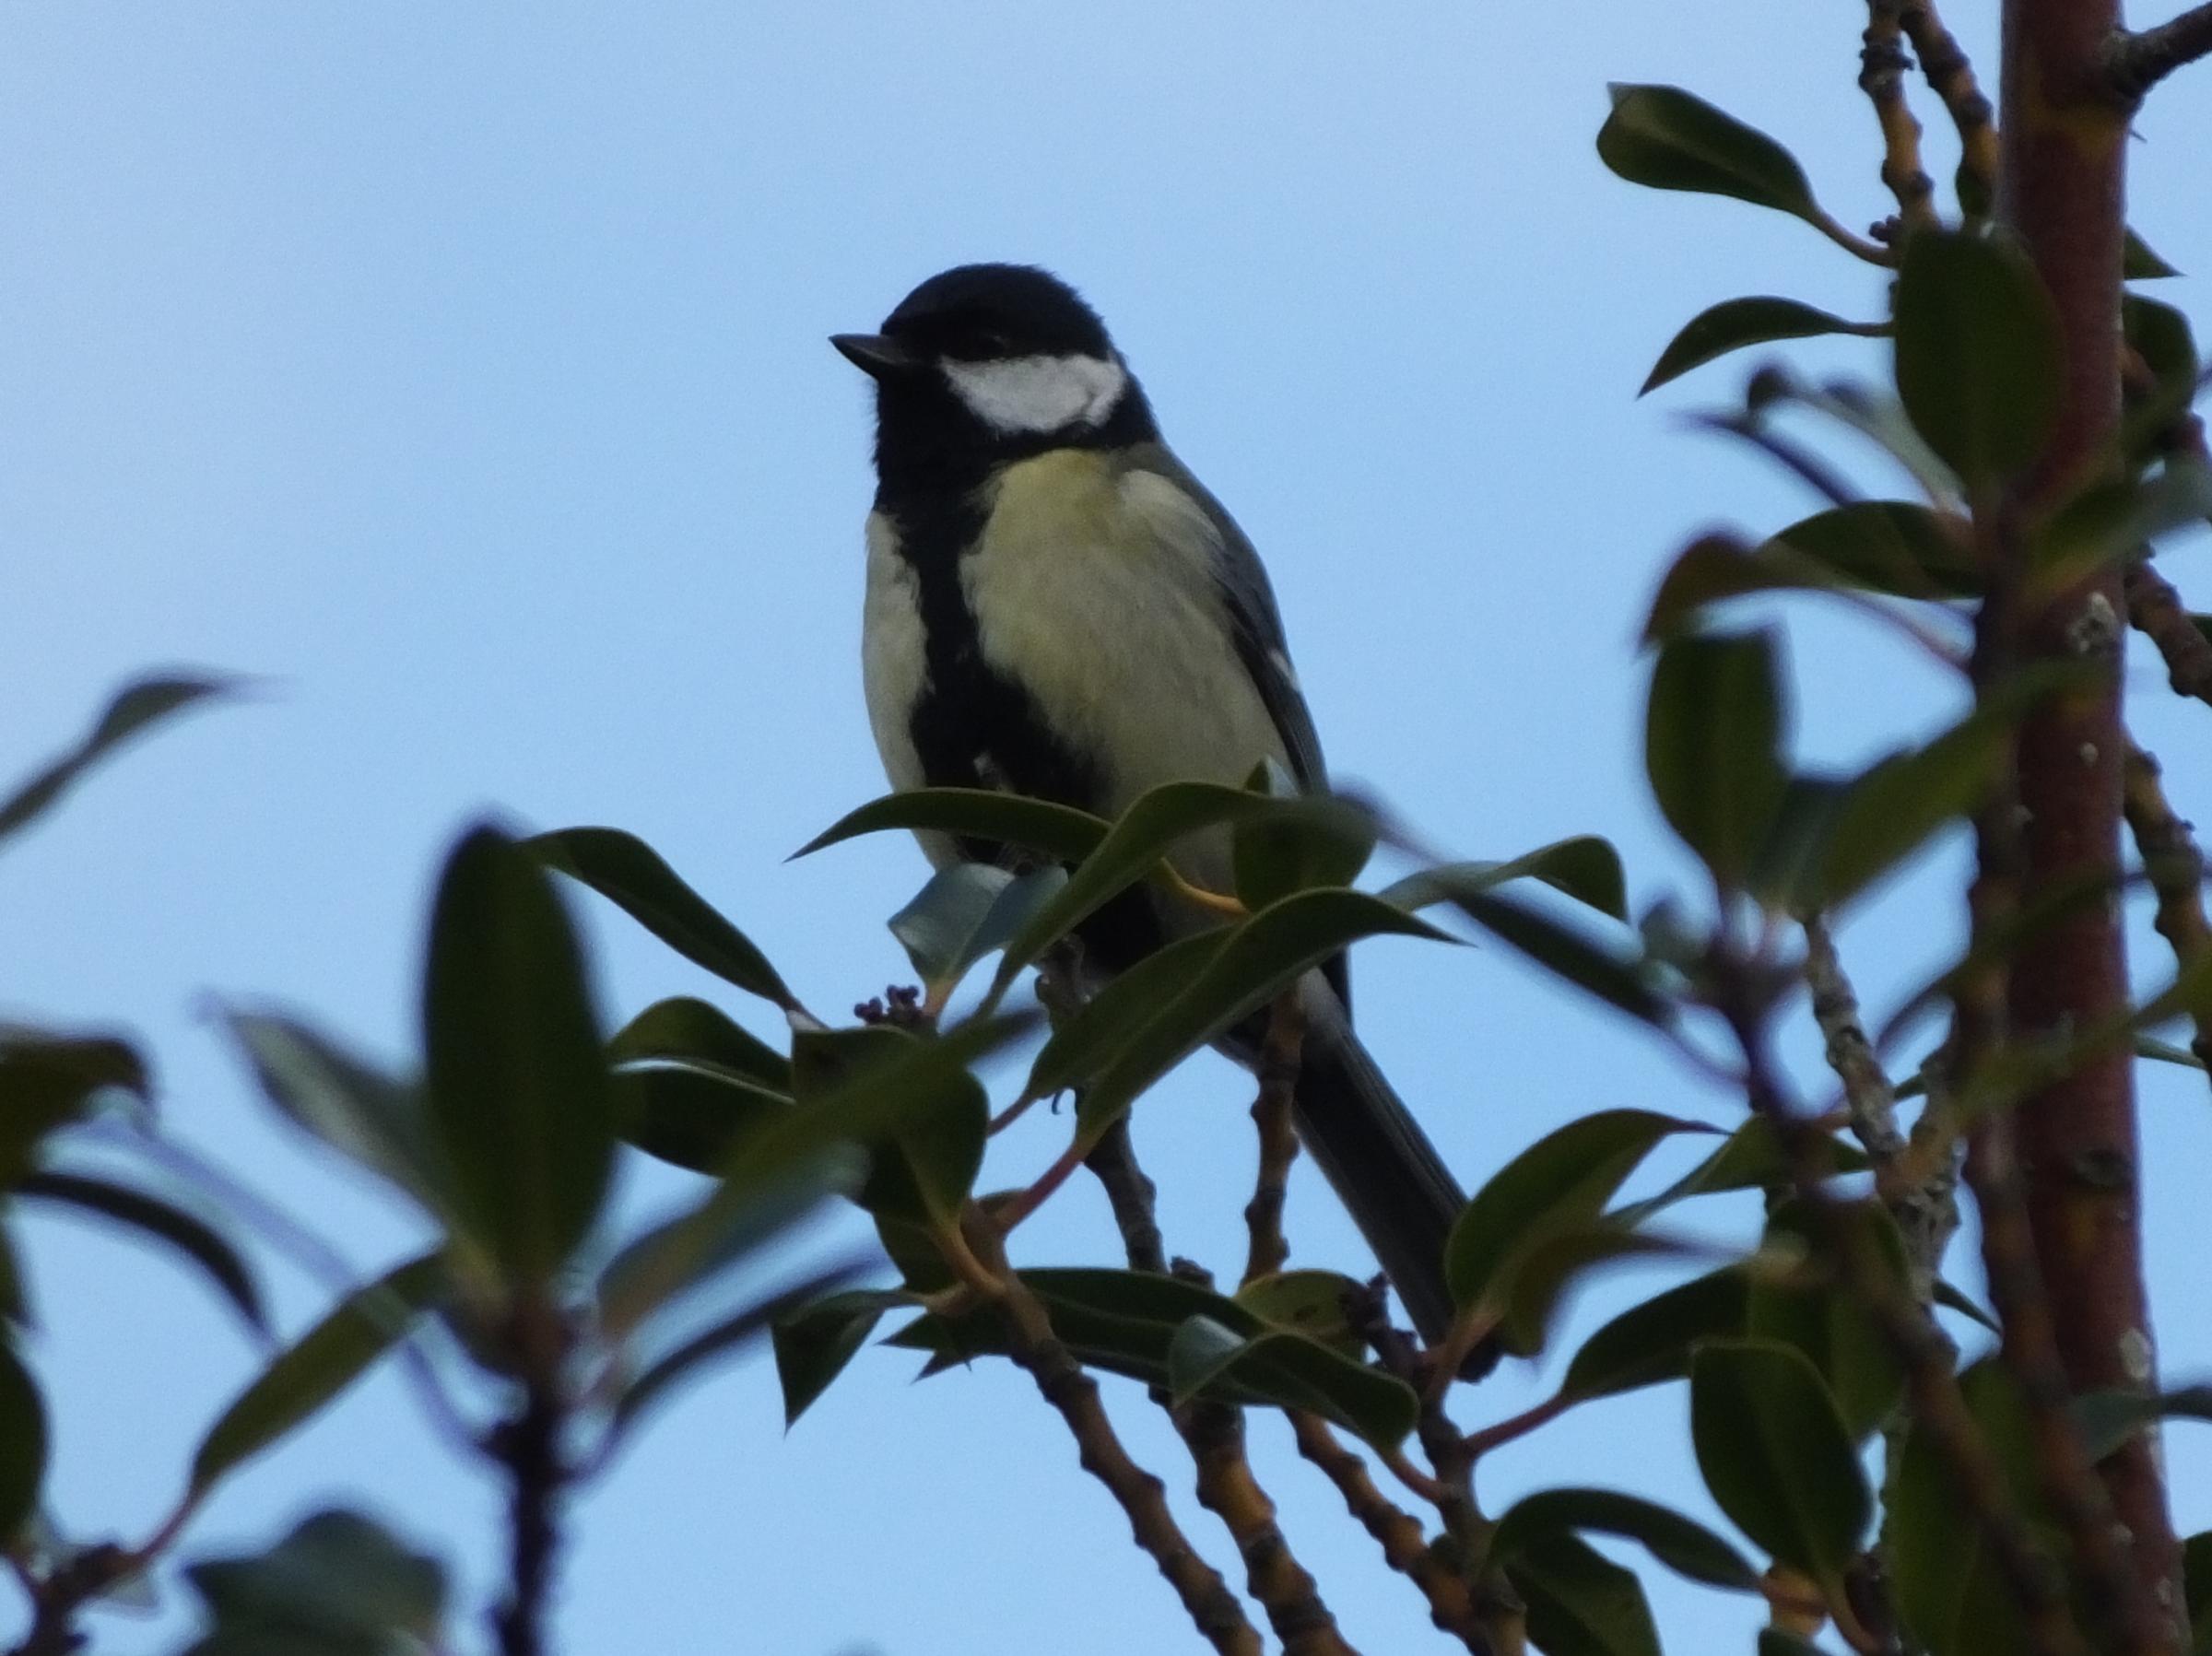 A member of the tit family